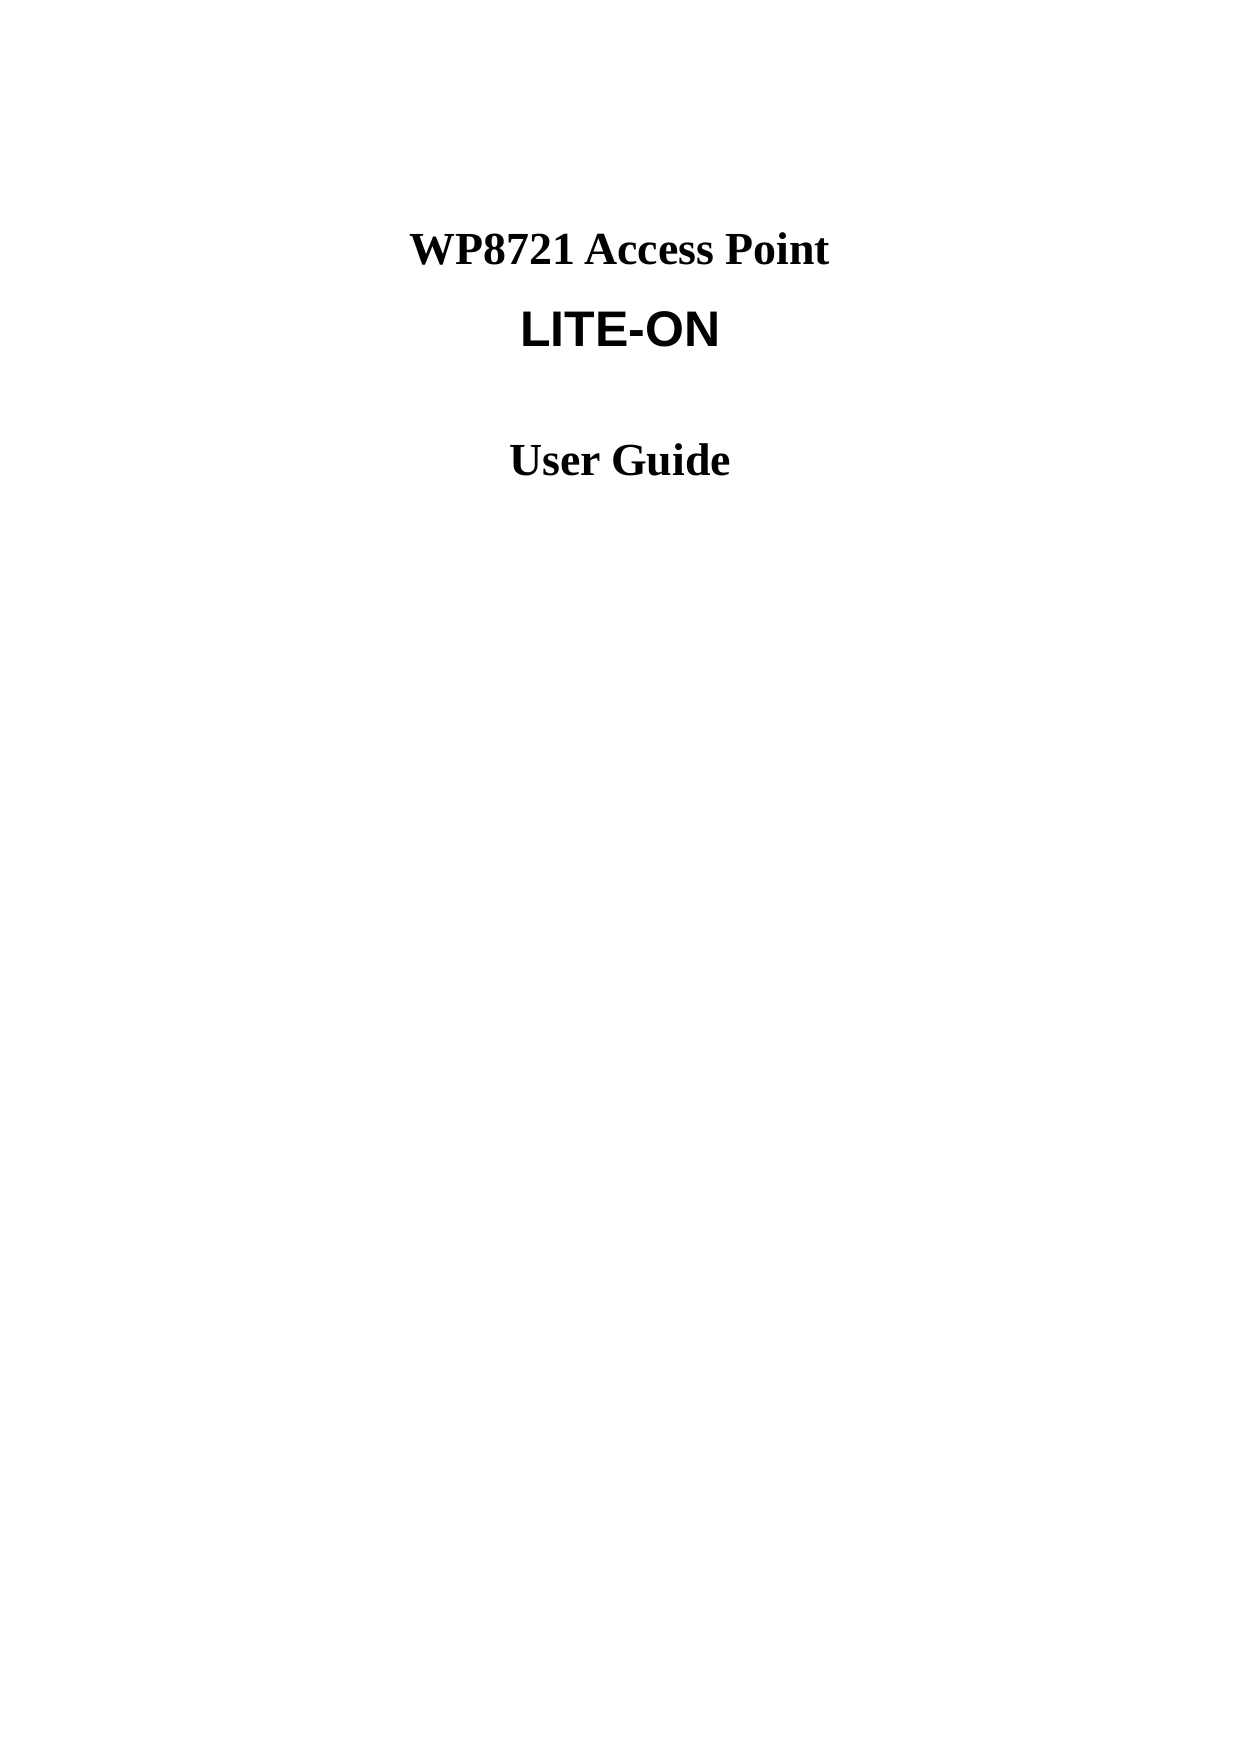  WP8721 Access Point   LITE-ON  User Guide 